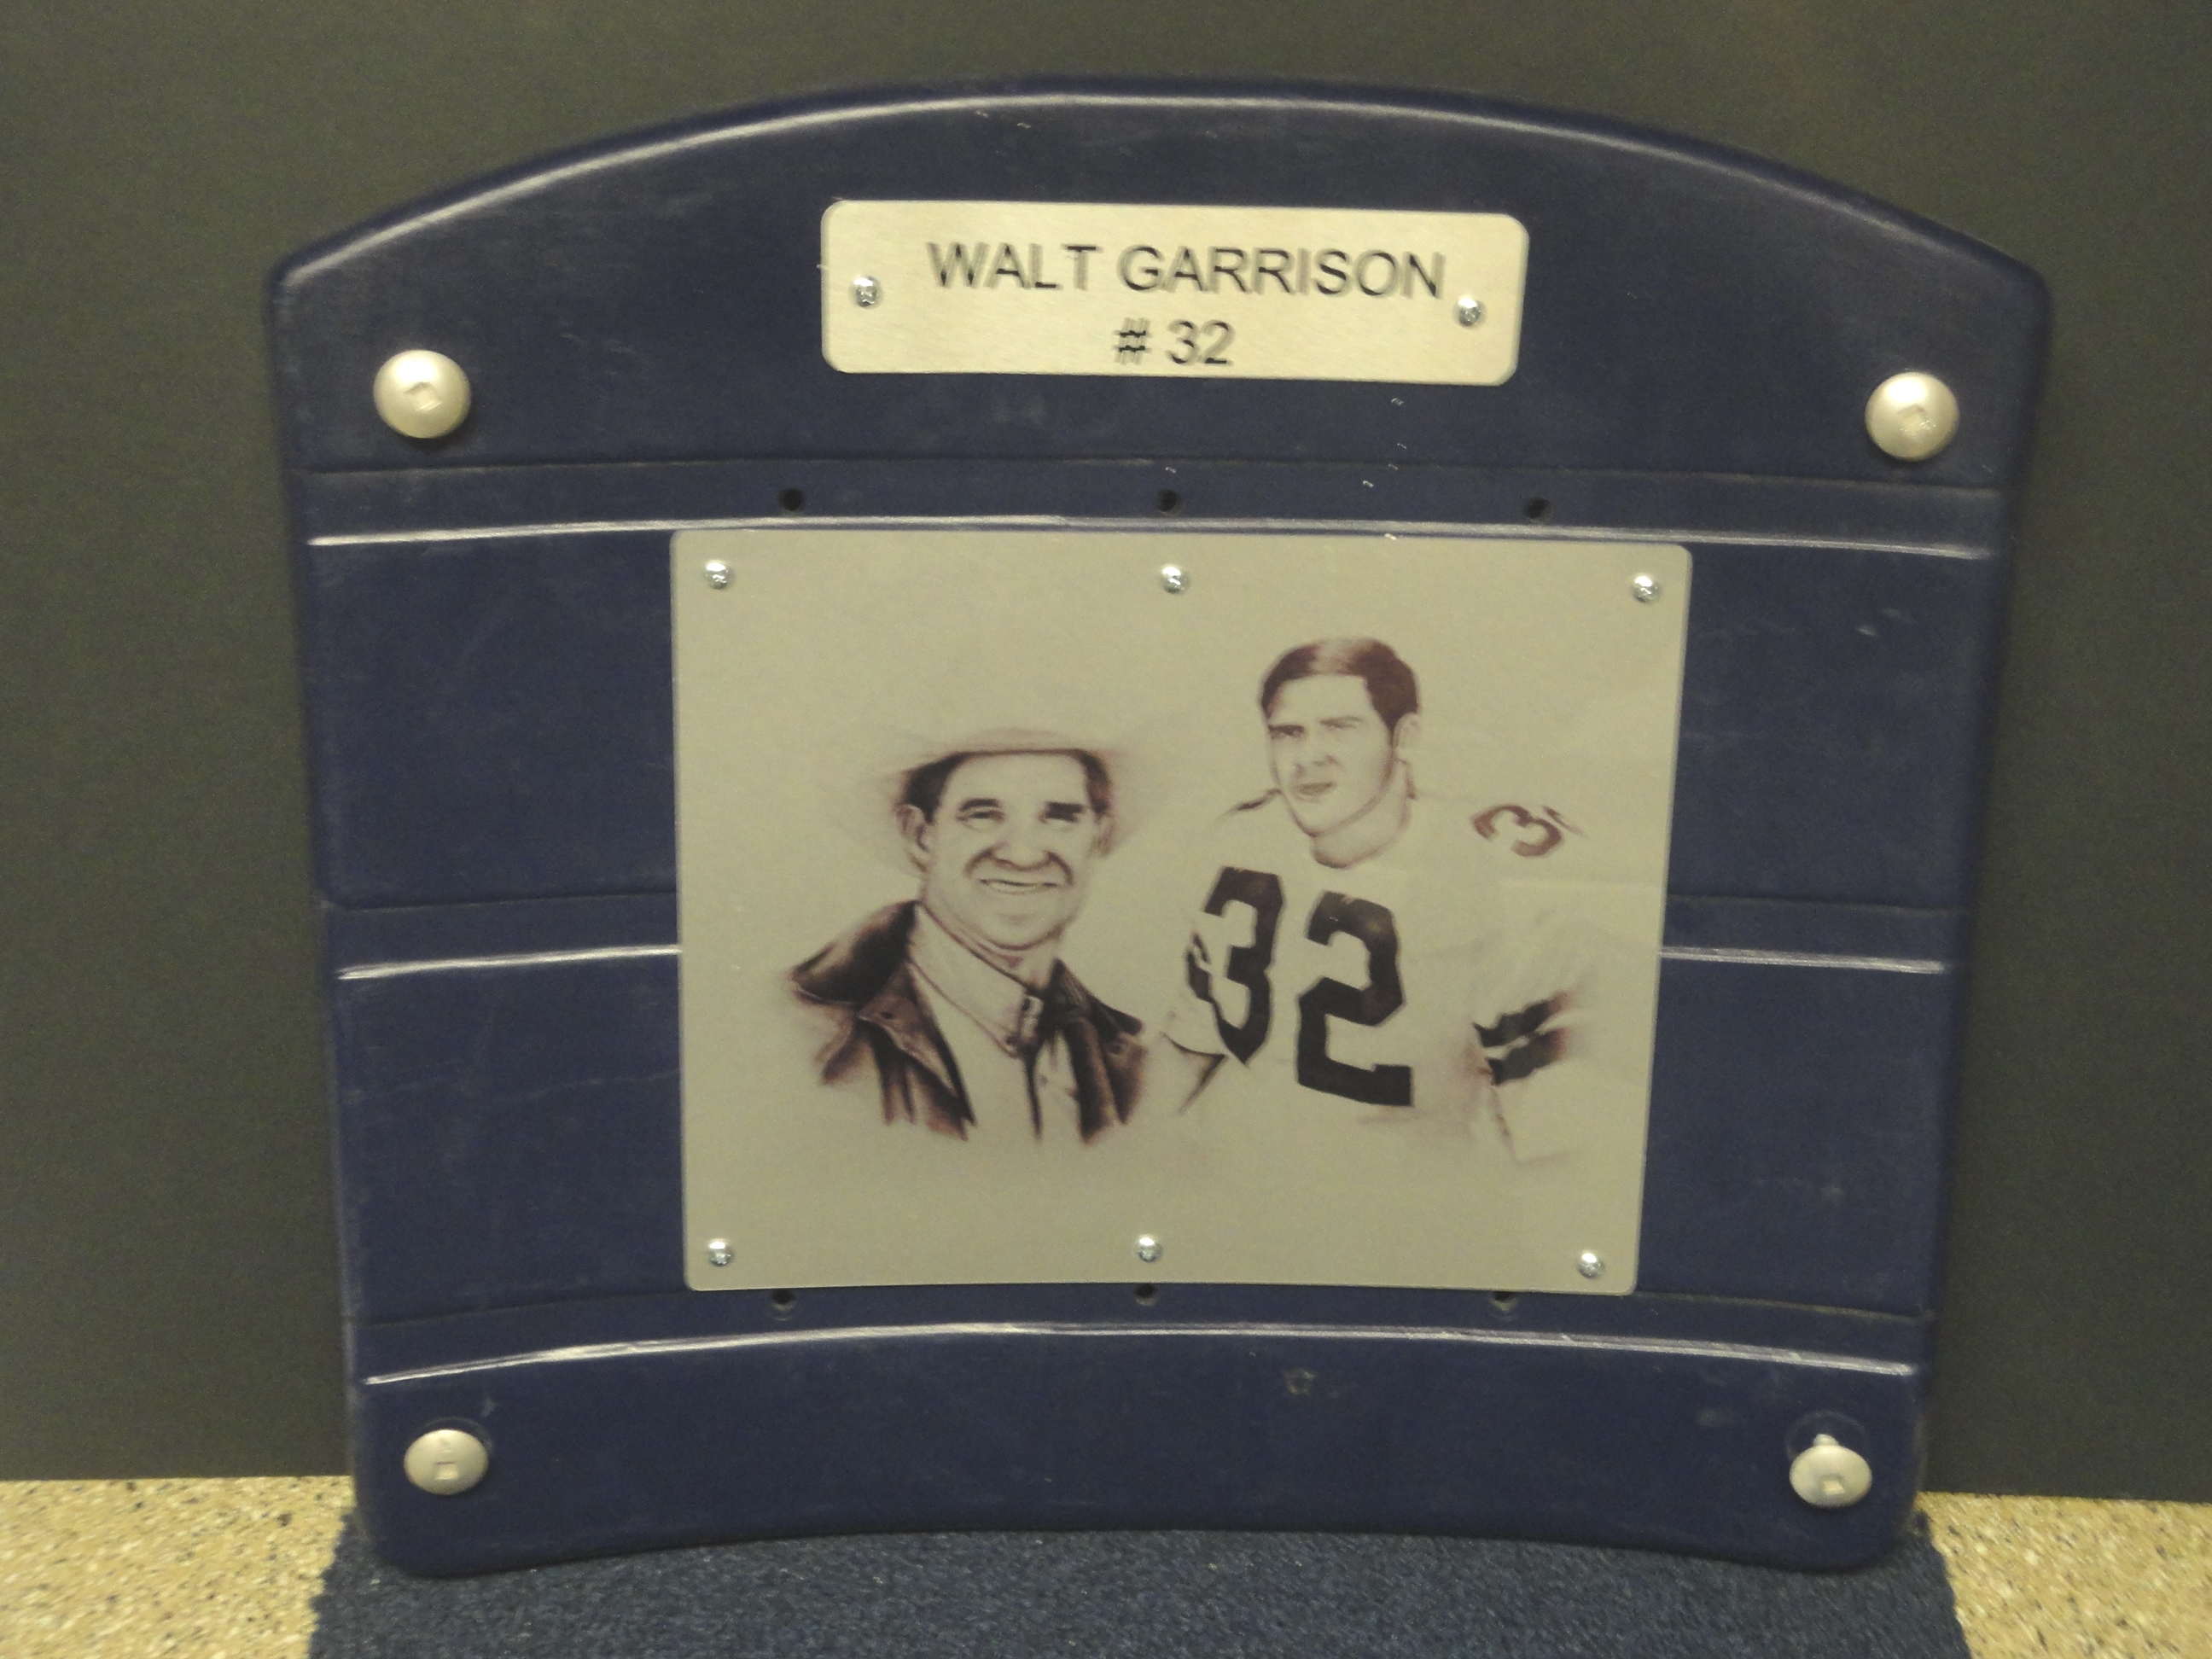 Dallas Cowboys Walt Garrison Seat Bottom from Texas Stadium made with sublimation printing